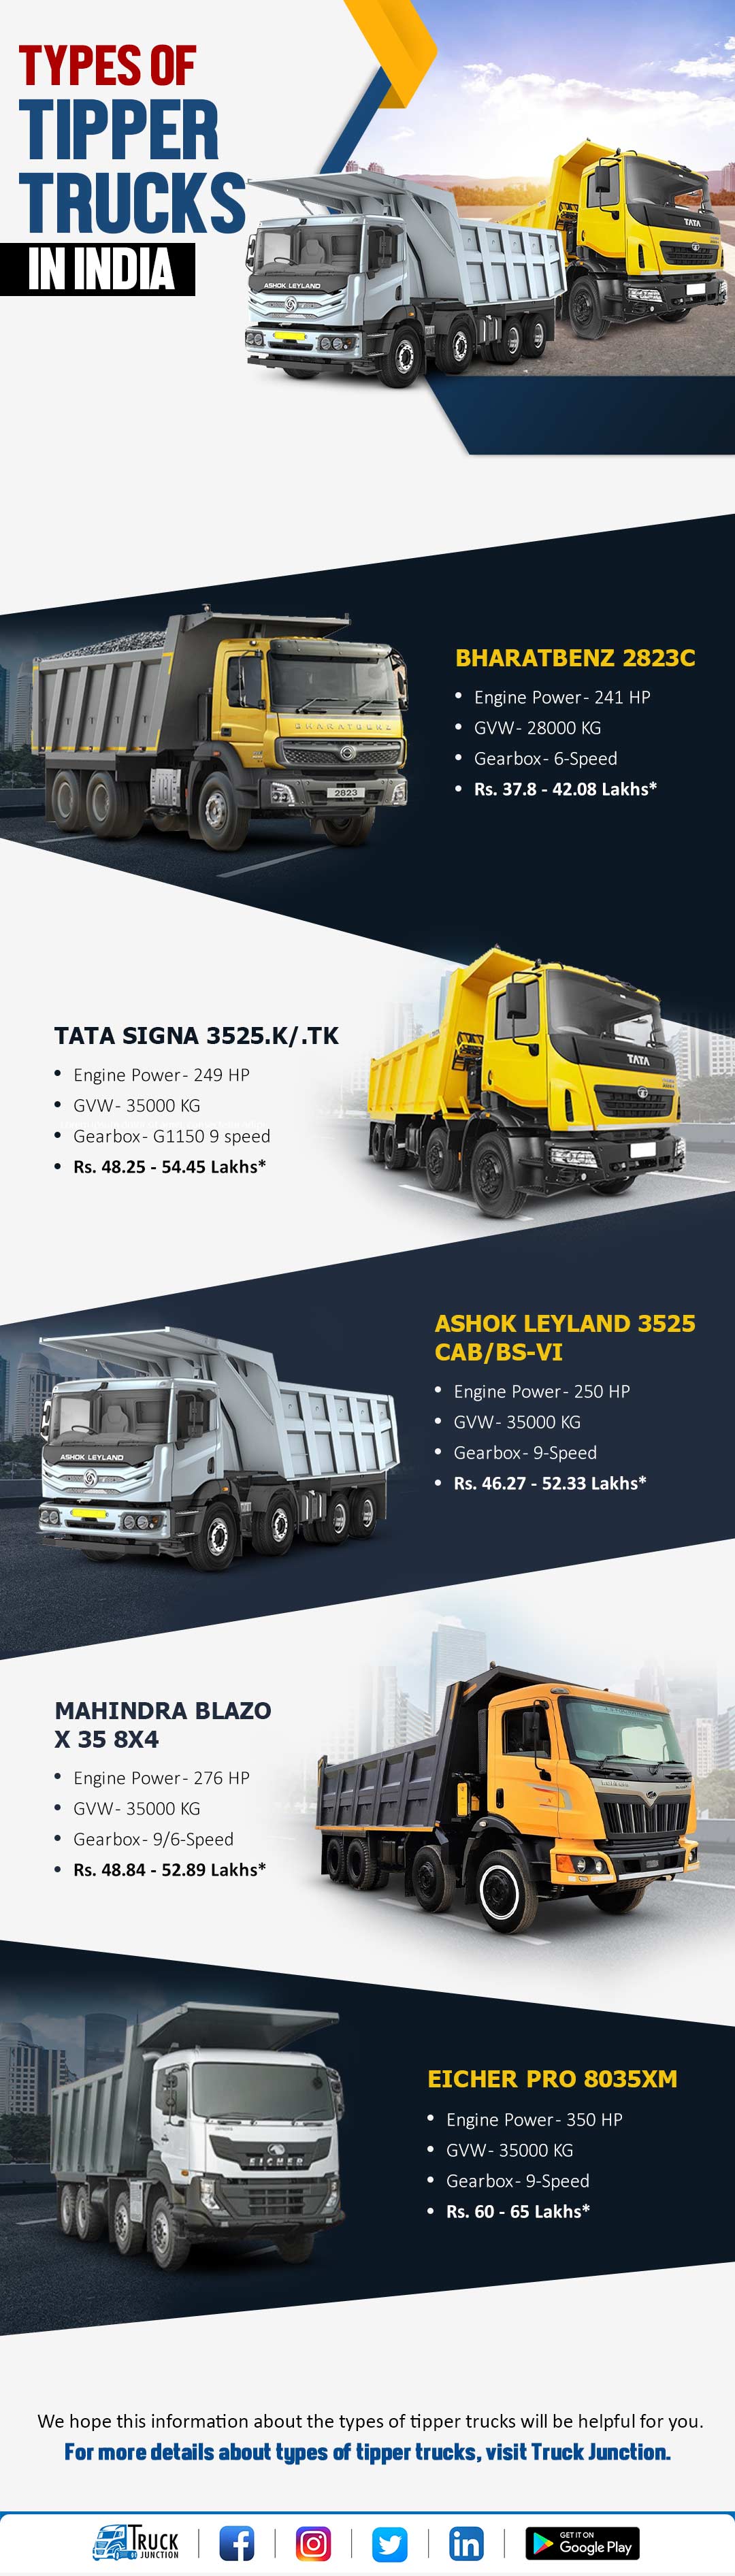 Types Of Tipper Trucks In India Infographic